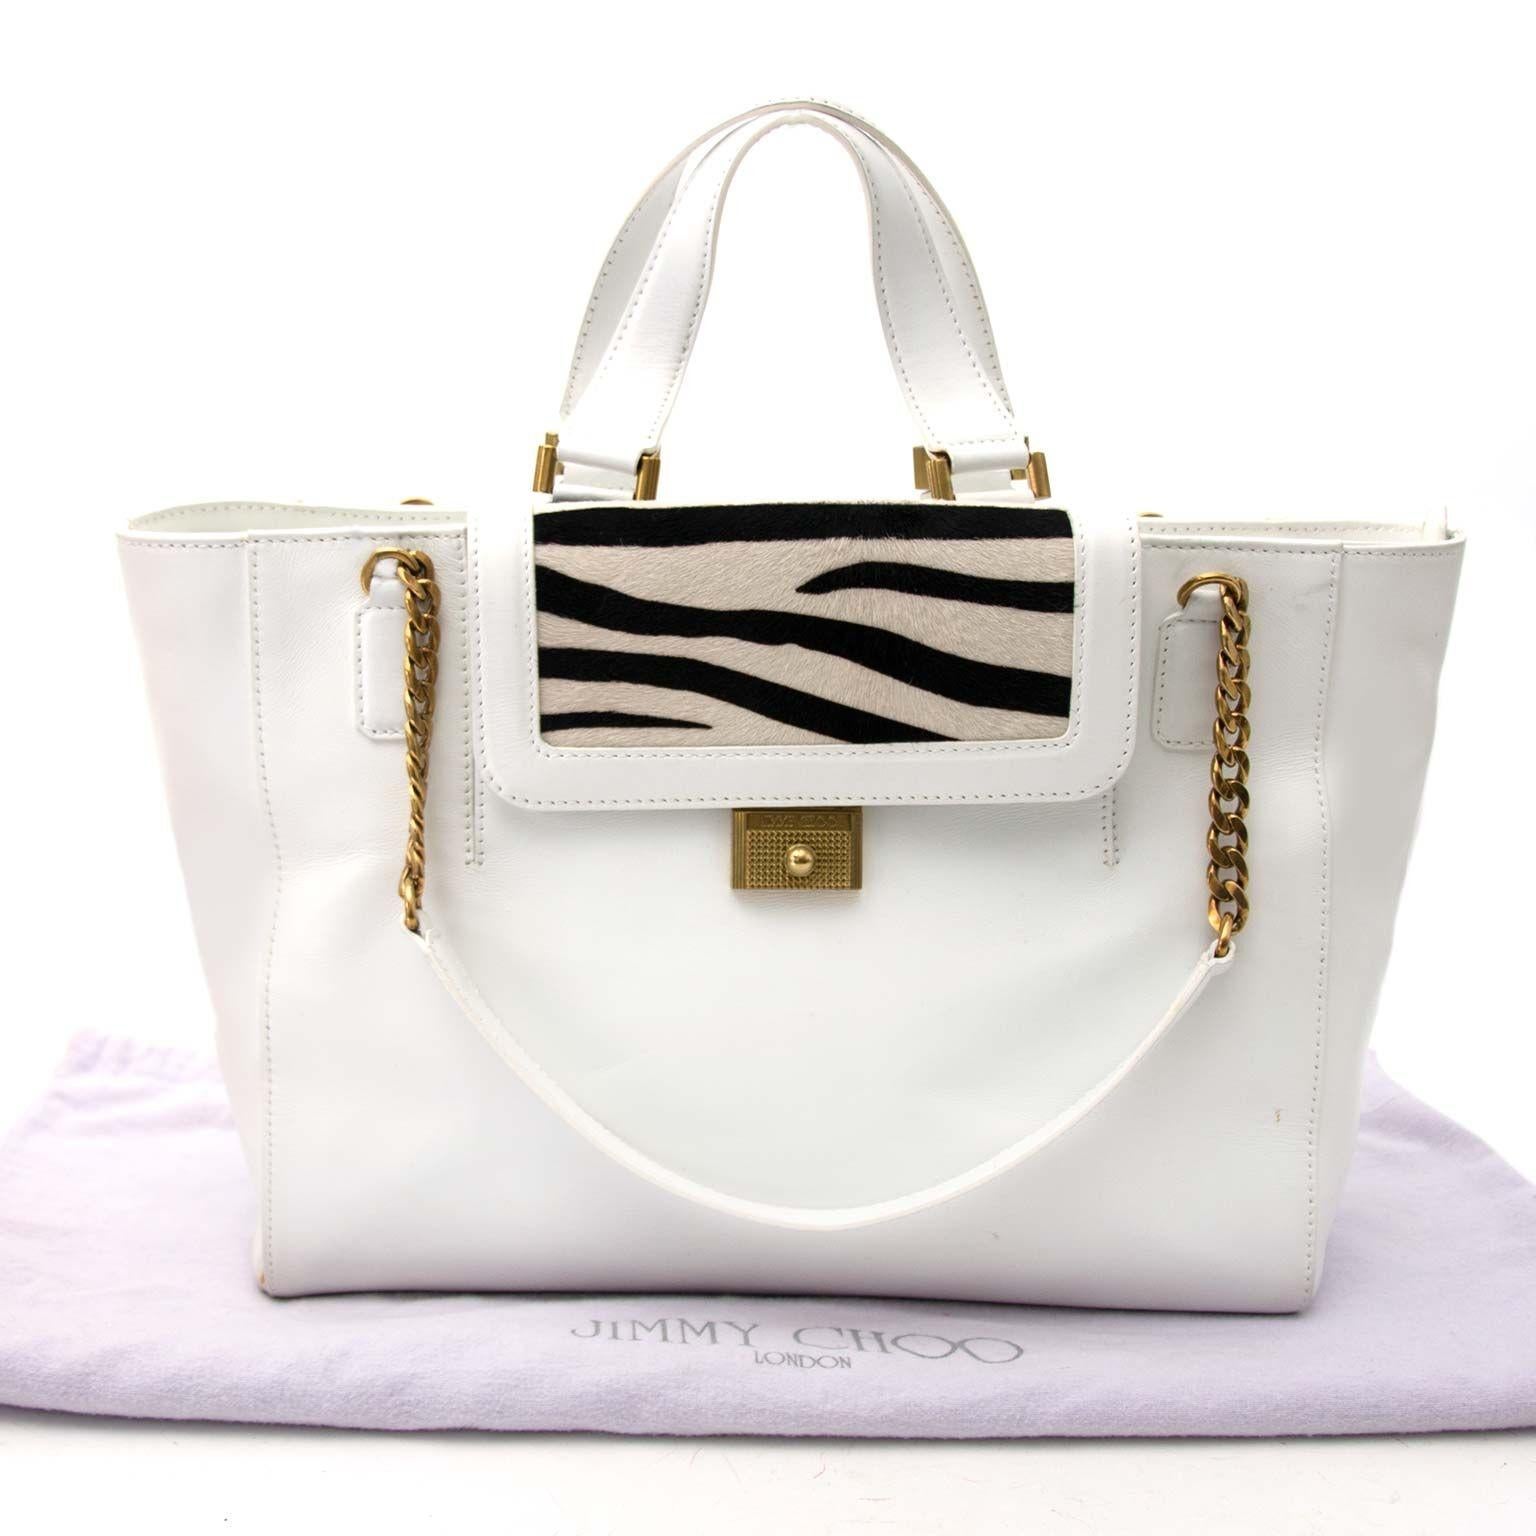 Preloved condition

Jimmy Choo White Tote bag with Zebra Pattern Flap

This tote bag is perfect for a summer shopping trip. The zebra pattern is made out of ponyhair. 
The inside of the bag is made out of  light brown suede. Top and shoulder handels